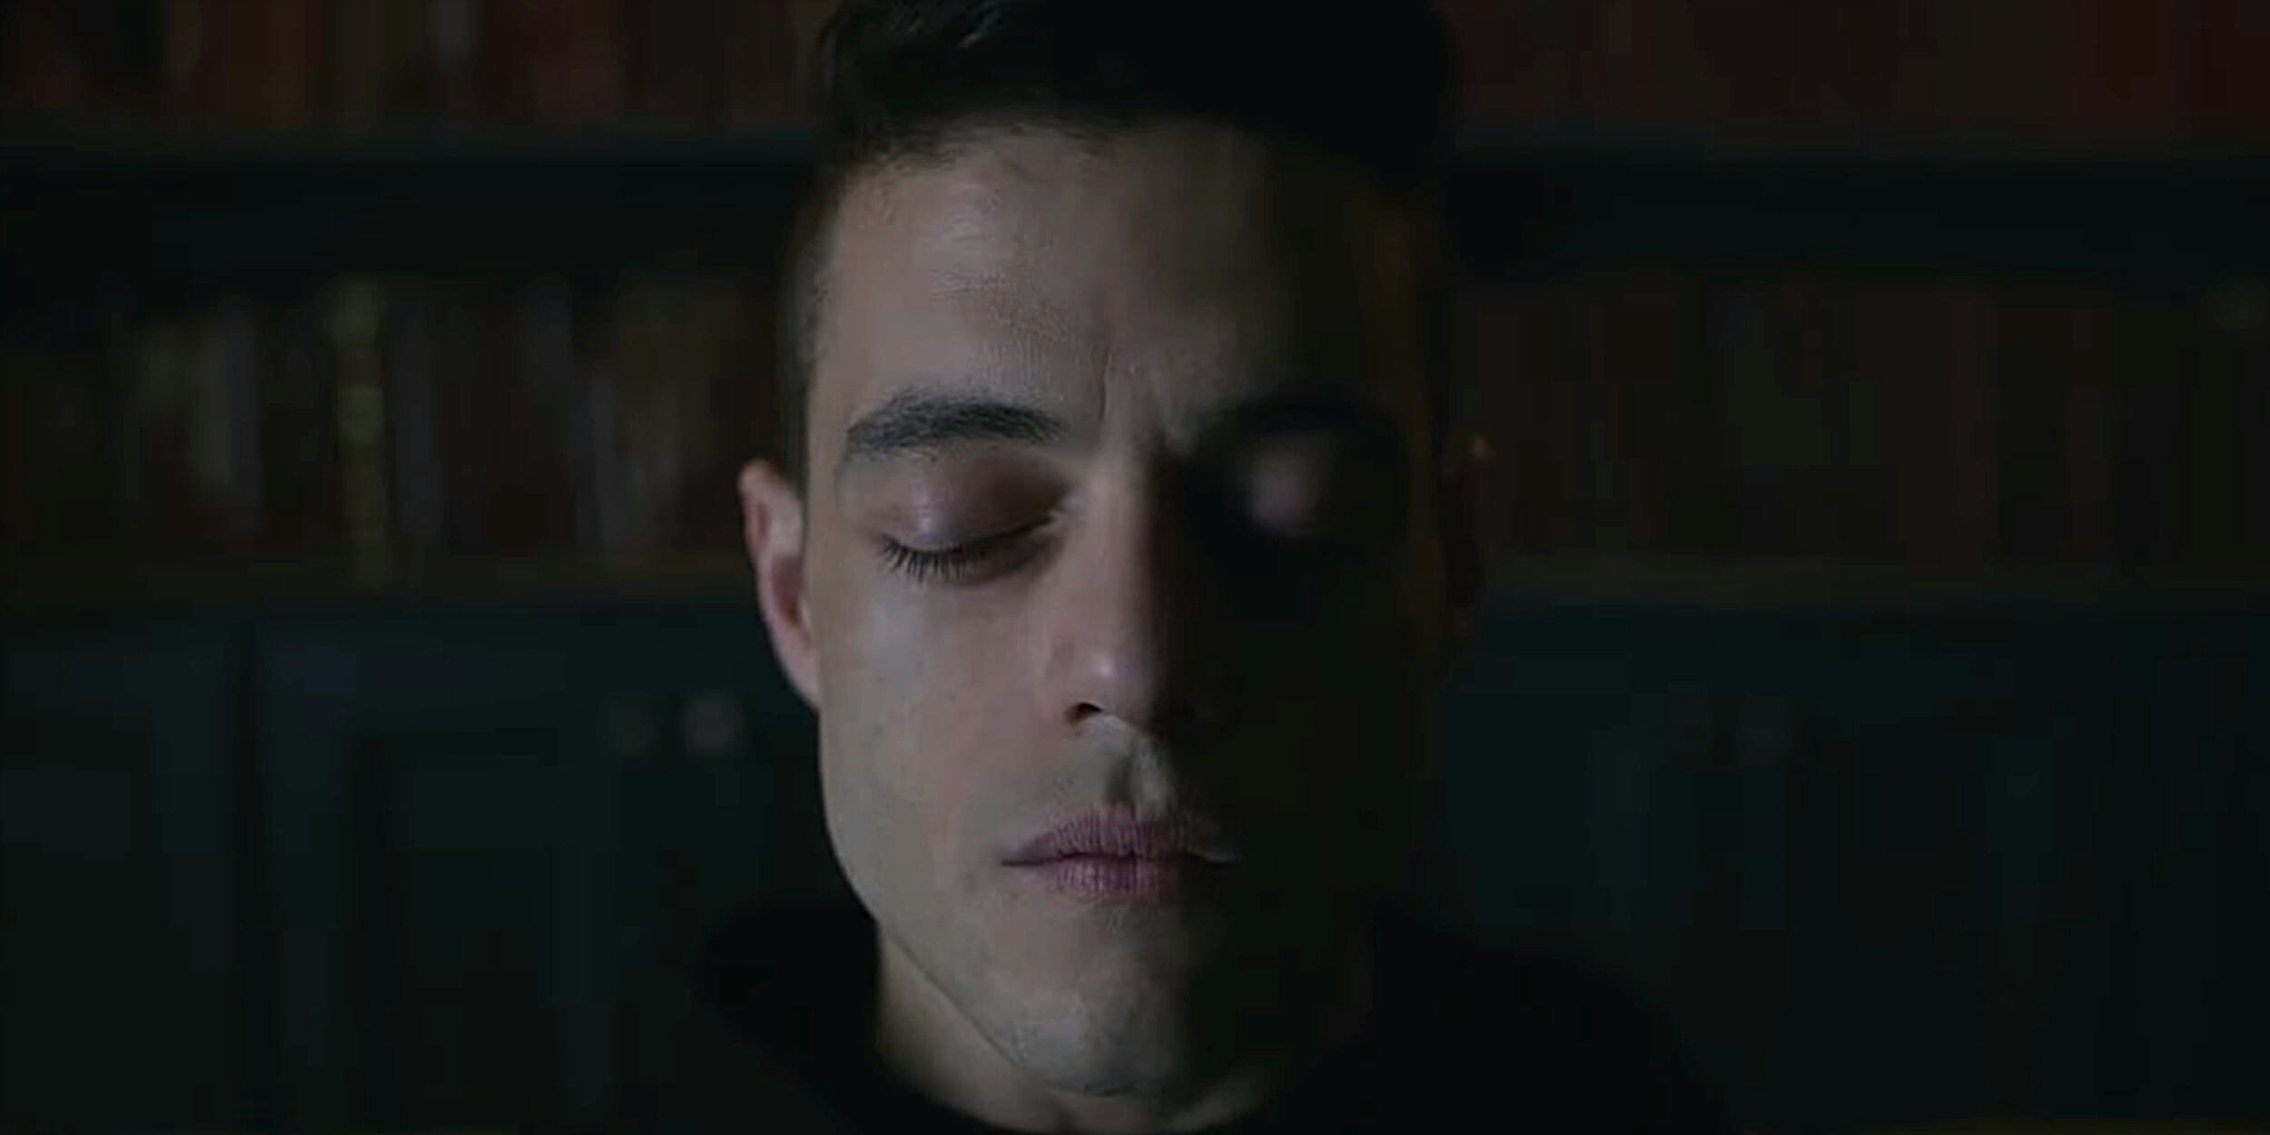 Rami Malek with his eyes closed in a dark room